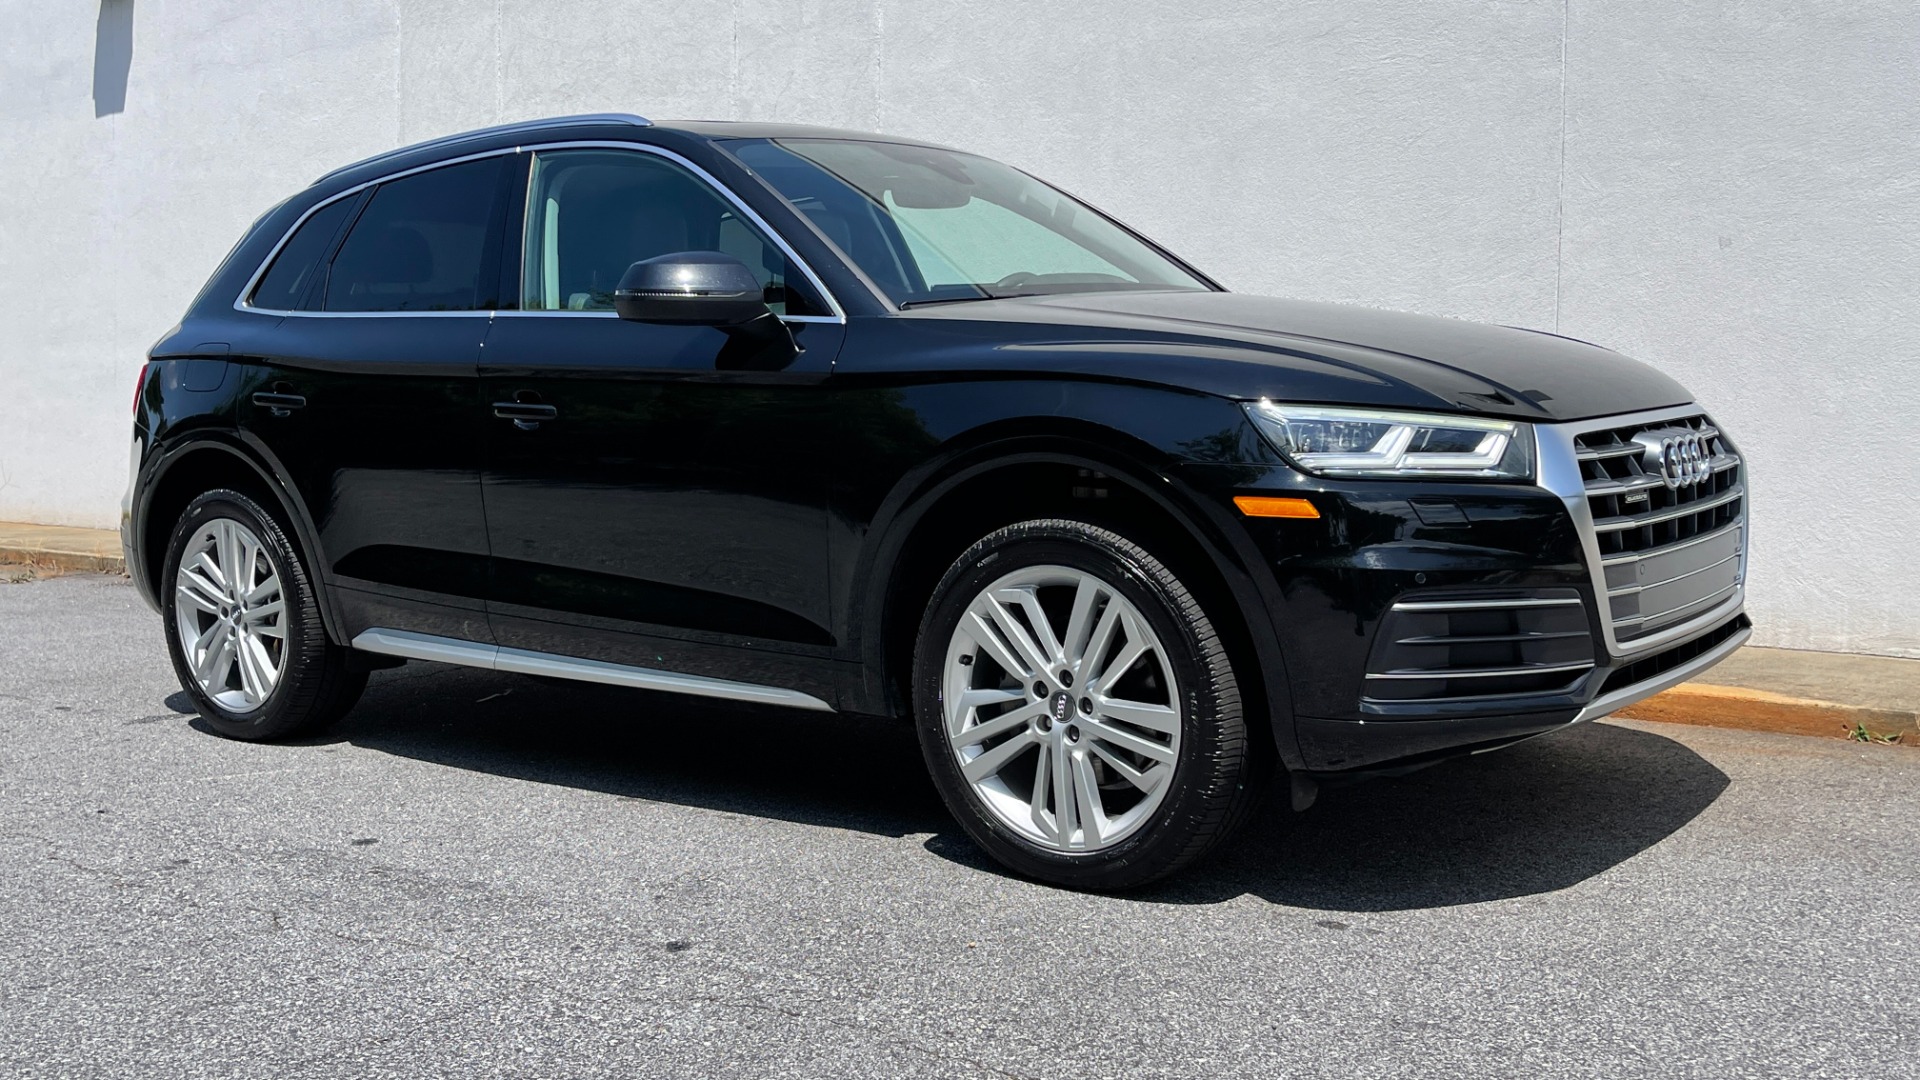 Used 2018 Audi Q5 PREMIUM PLUS / 20IN WHEELS / WARM WEATHER PACKAGE / AUDI CONNECT for sale $33,595 at Formula Imports in Charlotte NC 28227 2